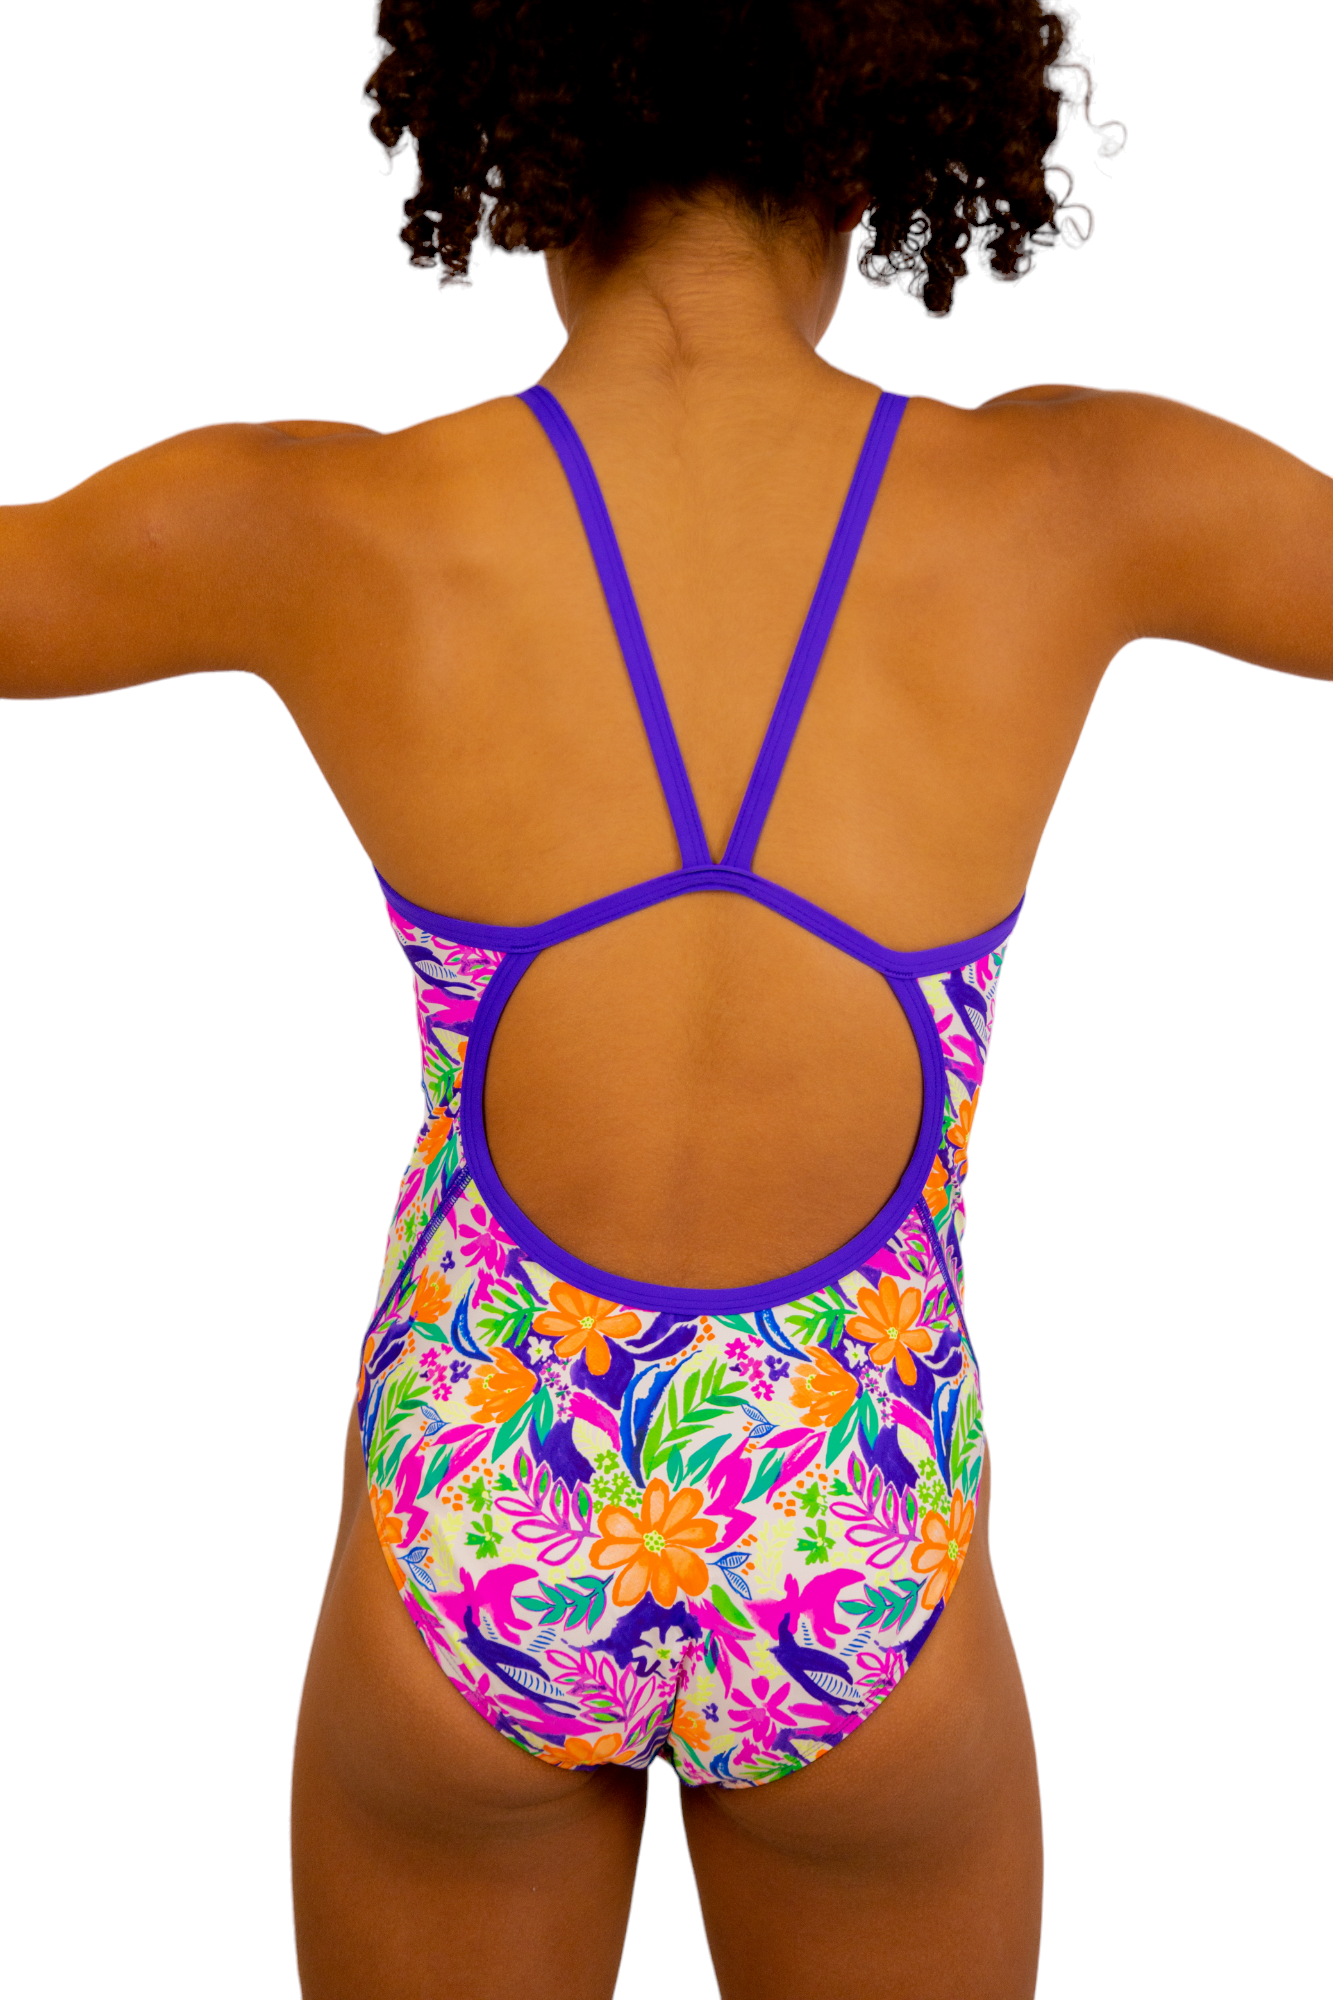 Bright Coloured Tropical Print One Piece Leotard or Swimsuit for Girls. Gymnastics Leotard, Girls Swimwear, Strappy Back, Racer Back, Tank Style, Thin Straps all Available. Fluorescent Purple, green, Yellow, Orange Flowers. Matching Scrunchie and Bike Shorts. B you Active, B you Leotards, B you Swimwear.